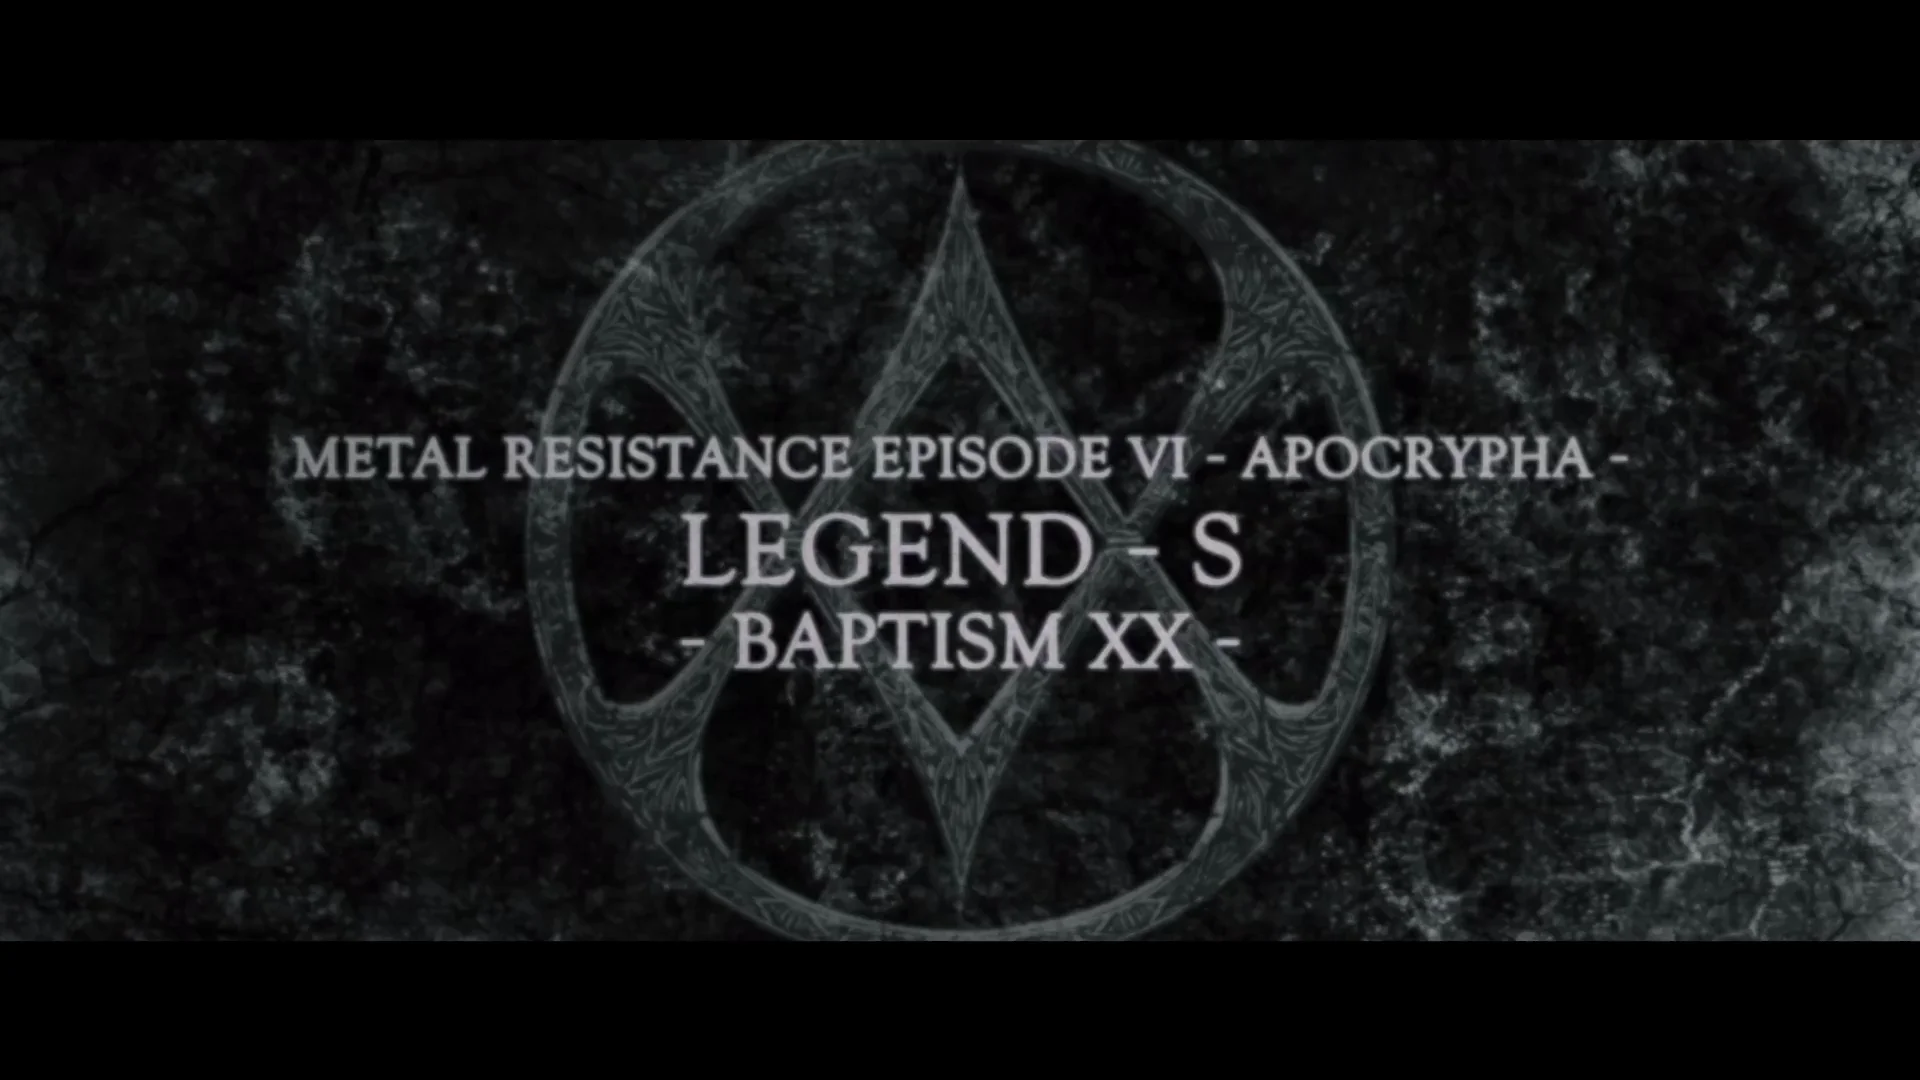 Blu ray rip] BABYMETAL - LEGEND - S - BAPTISM XX - IN THE NAME OF